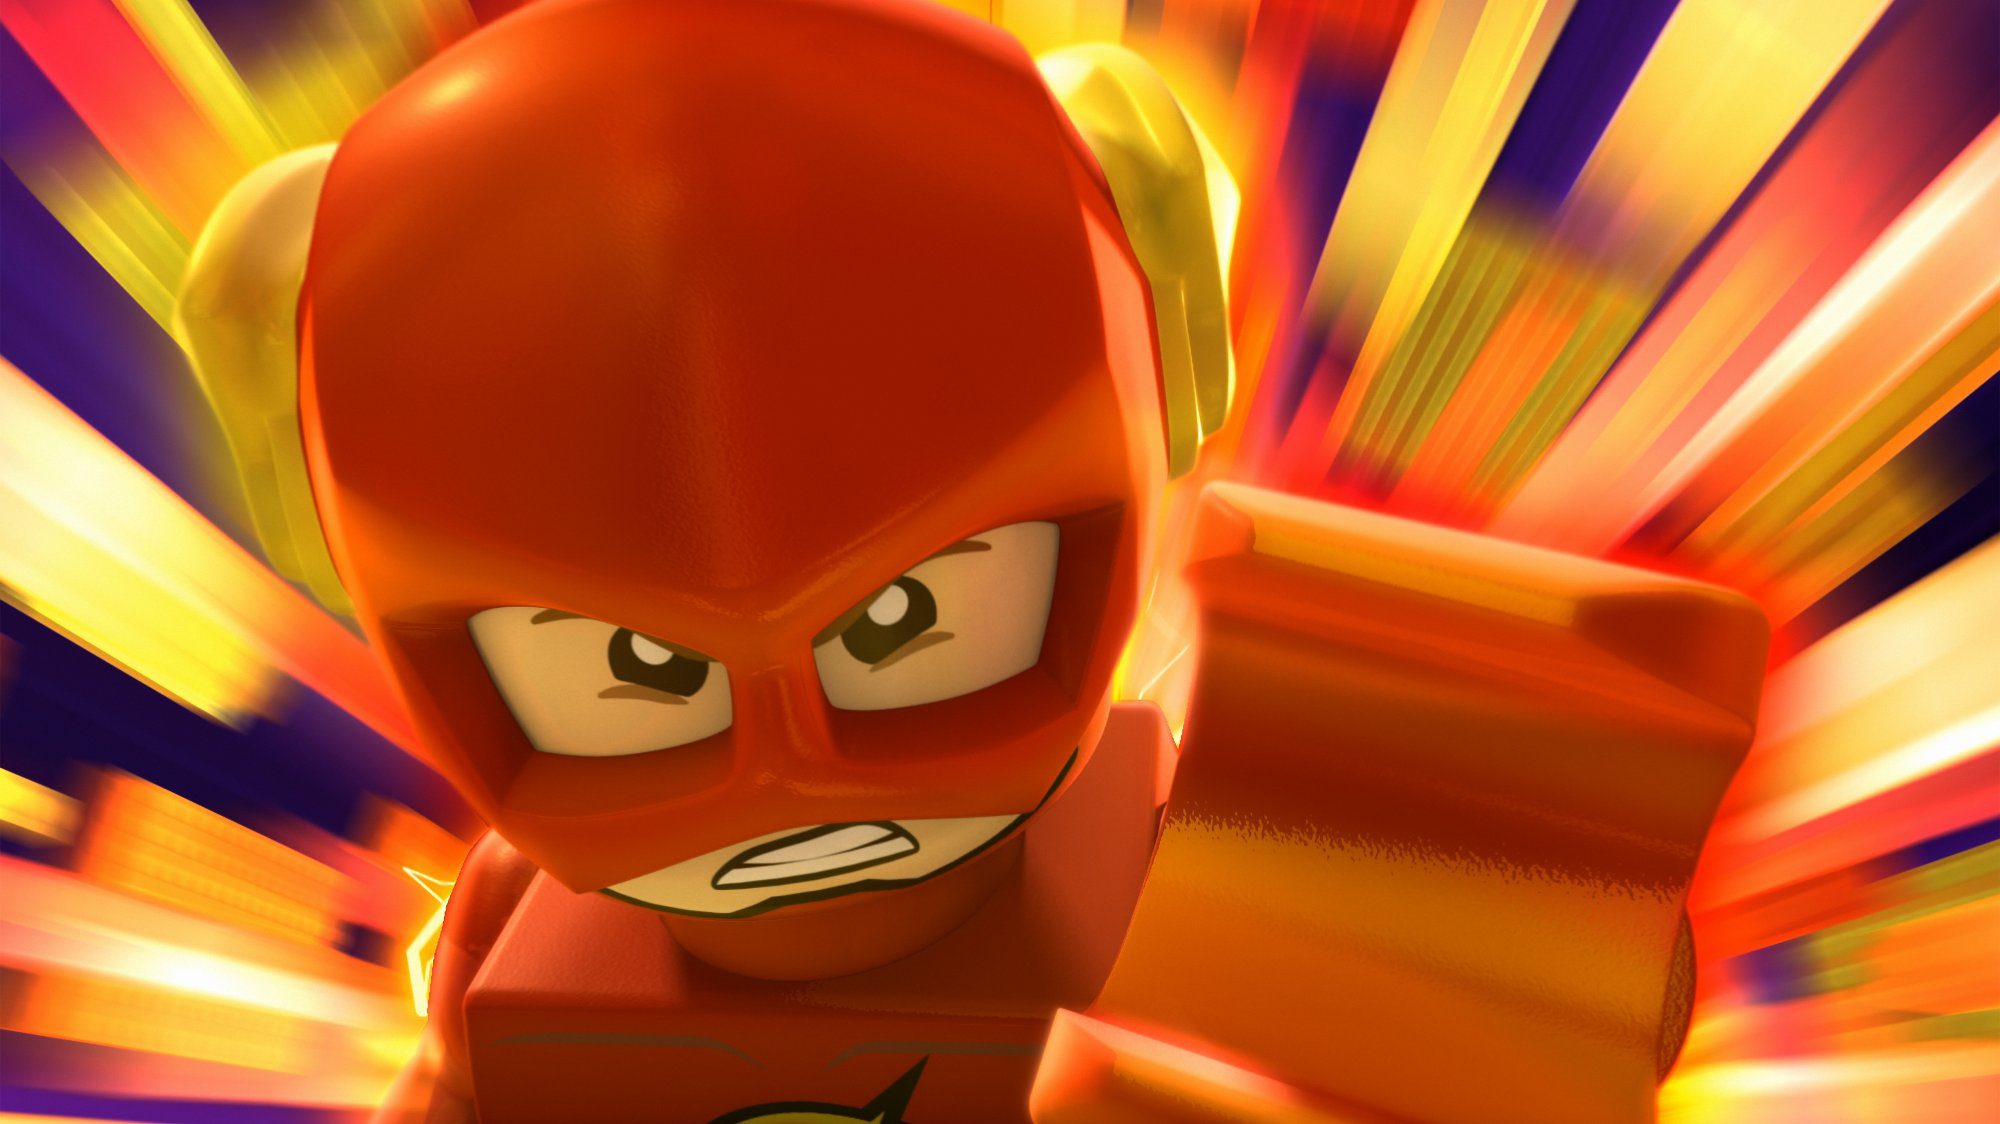 Find out how You can Attend the World Premiere of Lego DC Super Heroes: The Flash